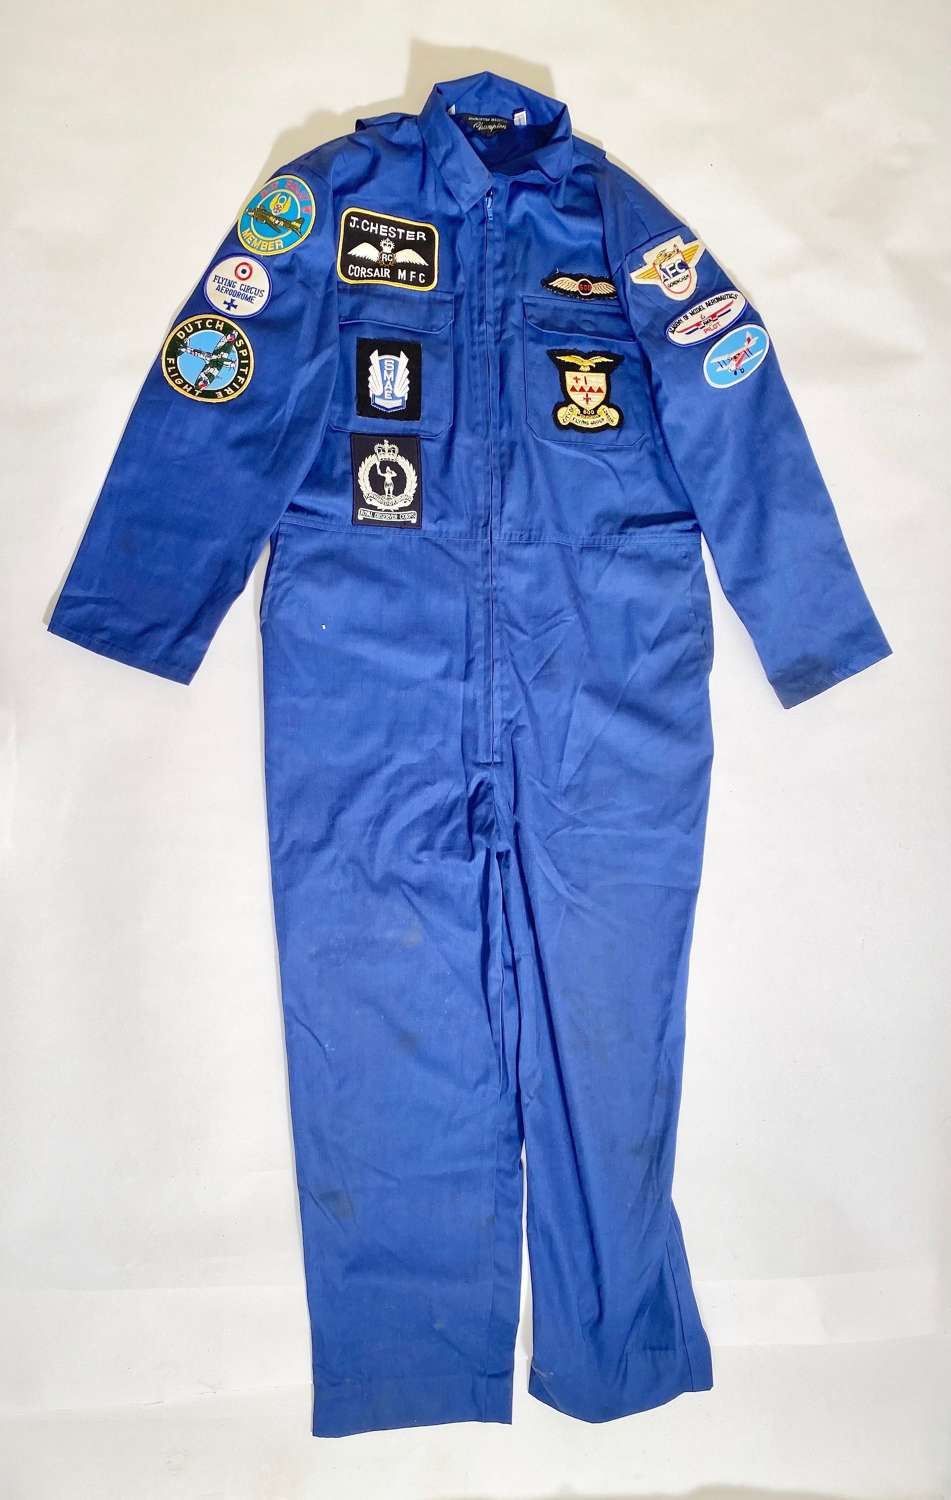 Aviation Themed Overalls.